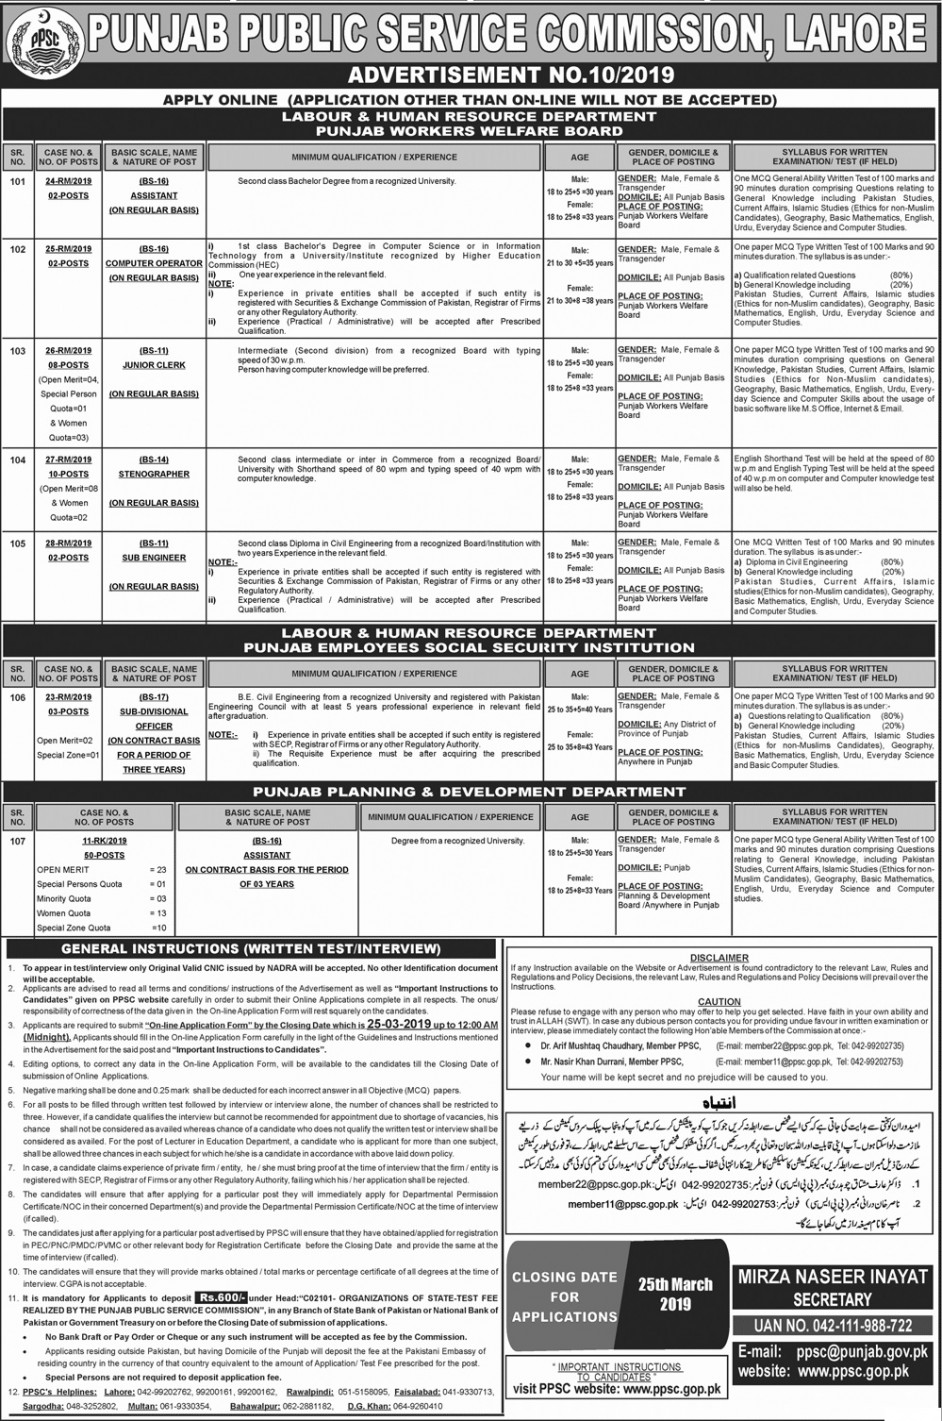 PPSC Latest Jobs Advertisement No 9/2019 of Junior Clerk, Stenographers and 50 Posts Assistant in Planning and Developent Department 